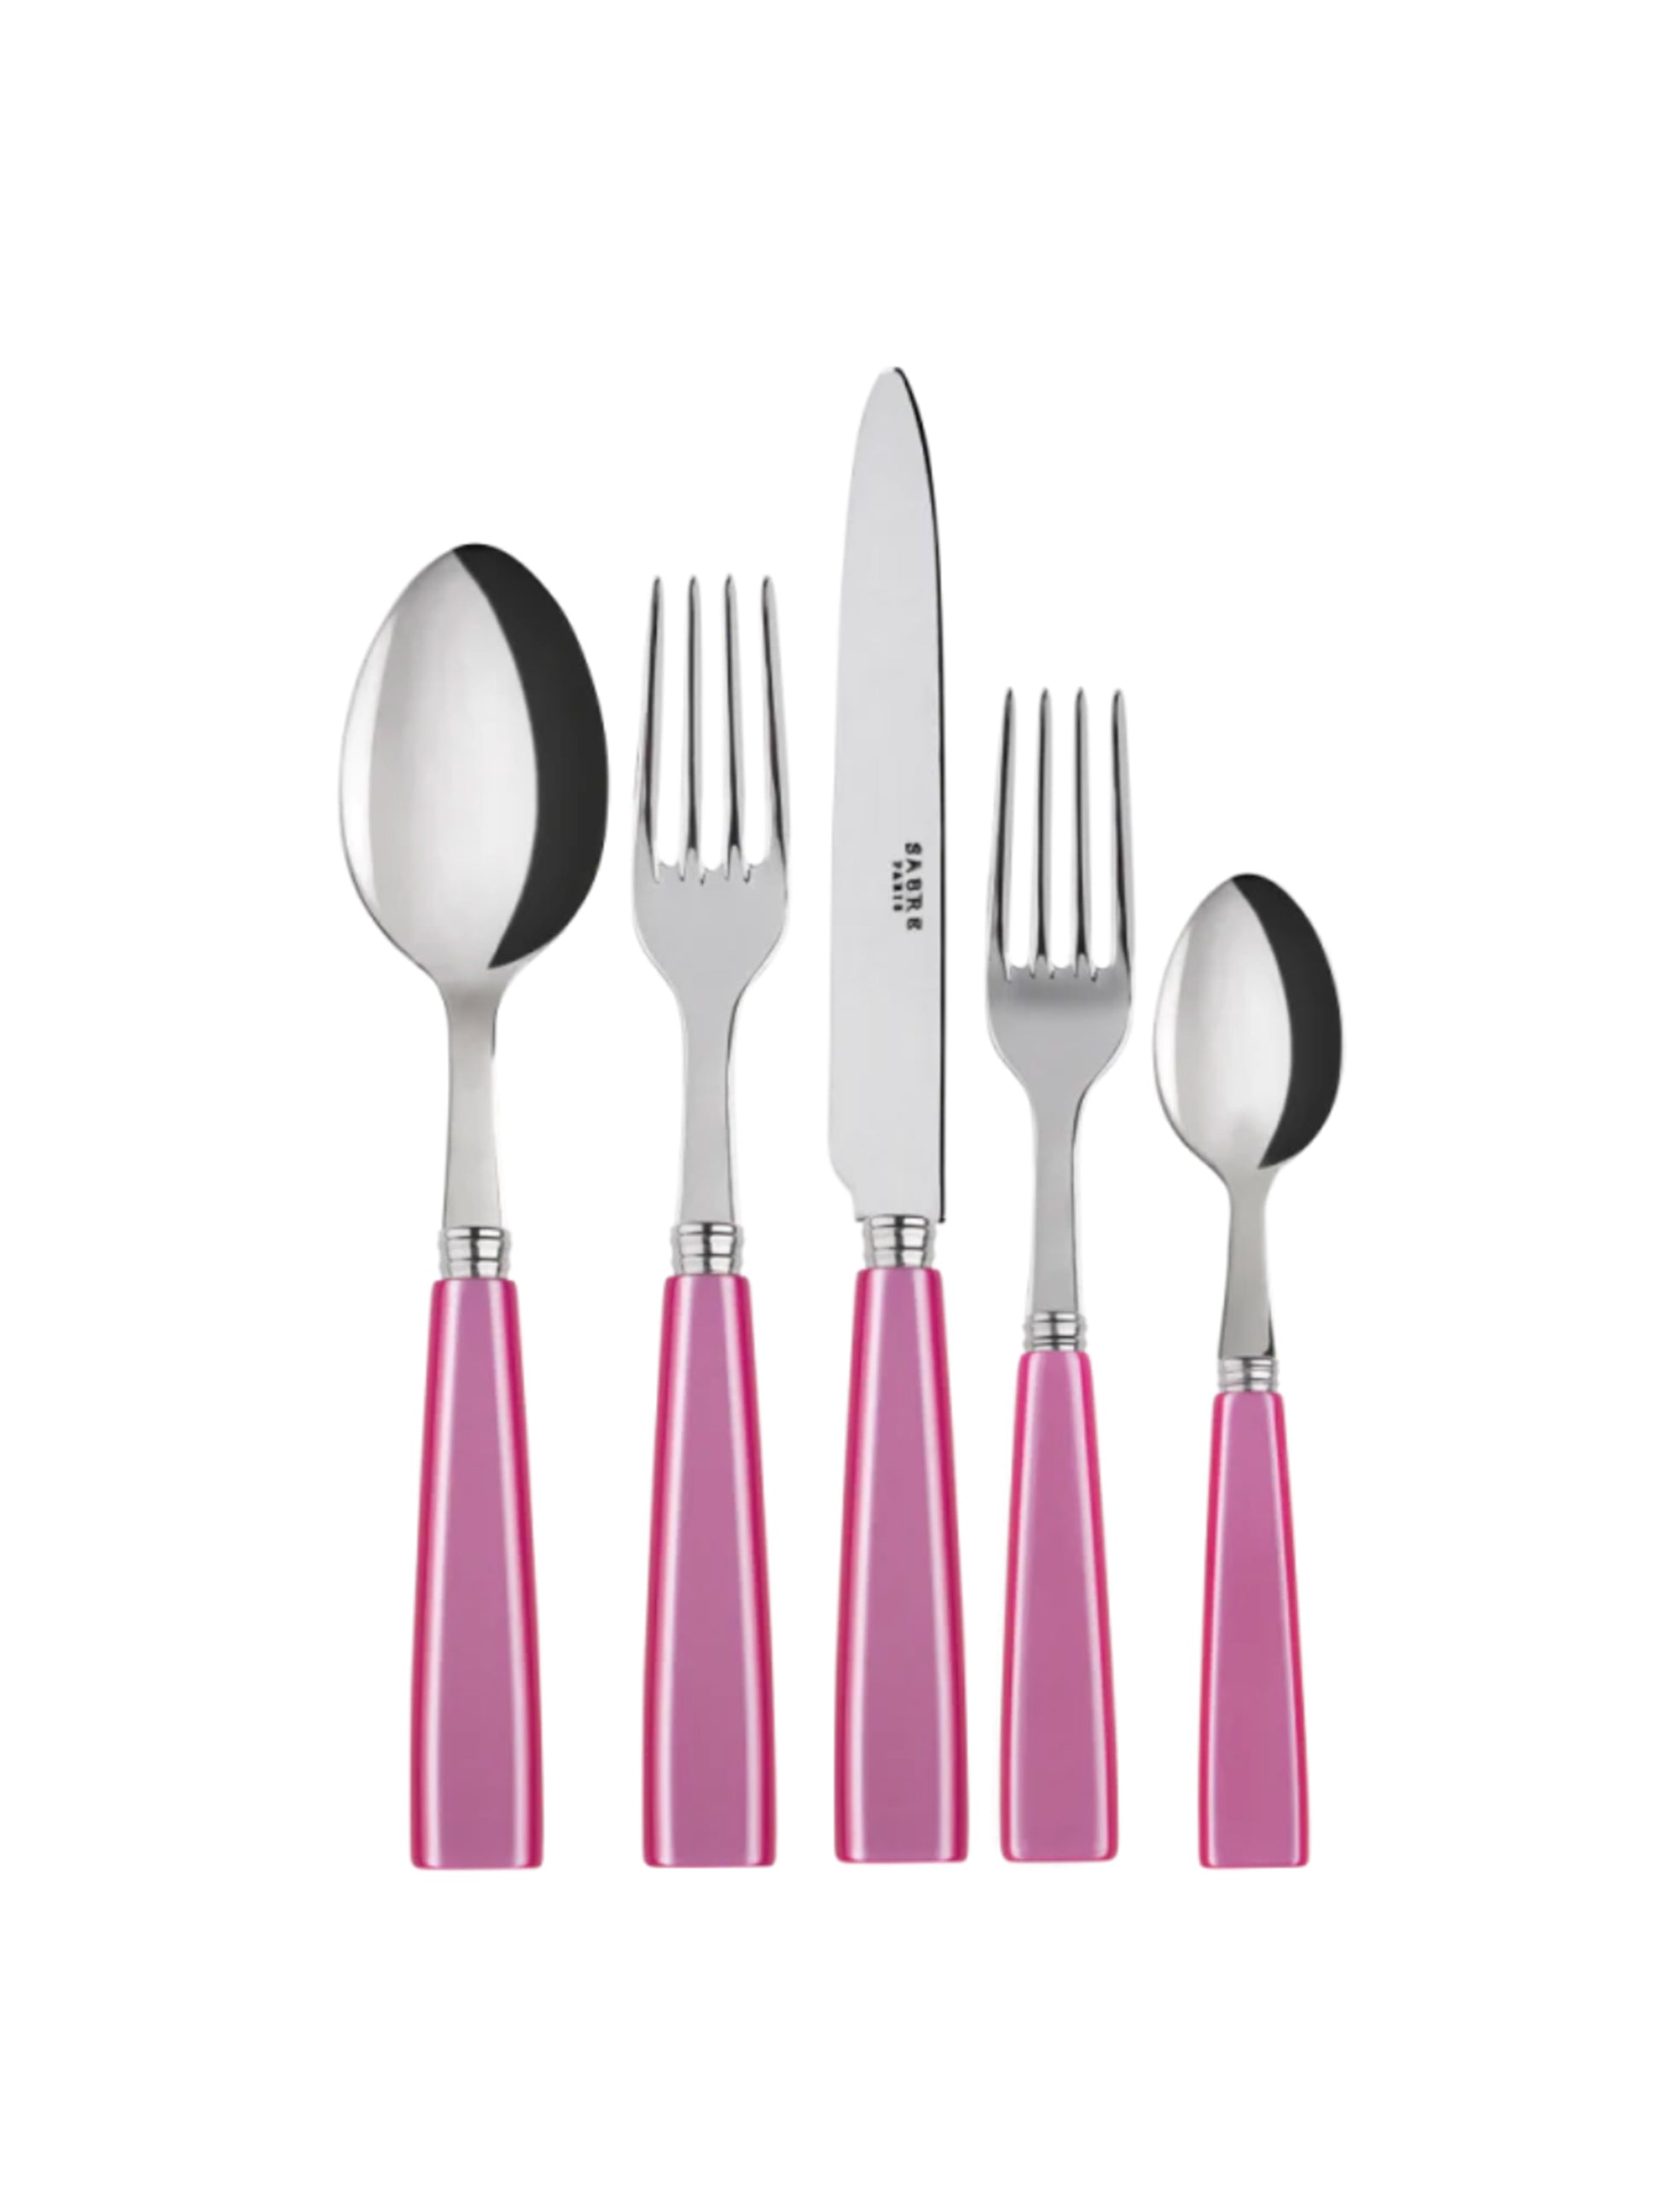 Sabre Paris Icone Pink Candy 5 Piece Place Setting Weston Table